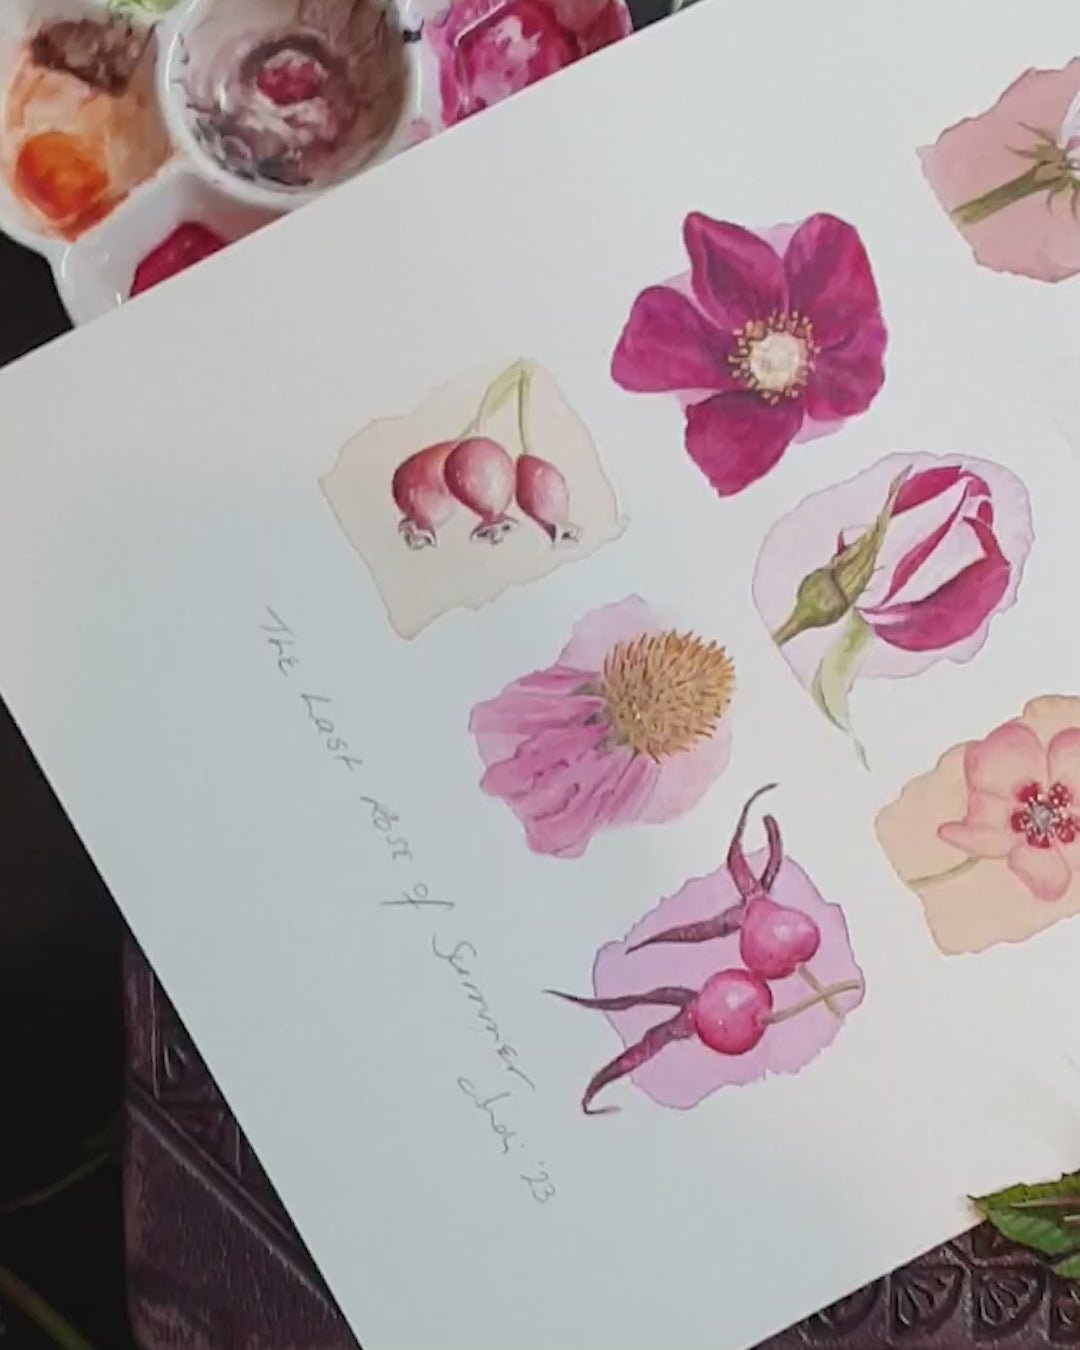 Video zooming in on the artwork of roses and echinacea